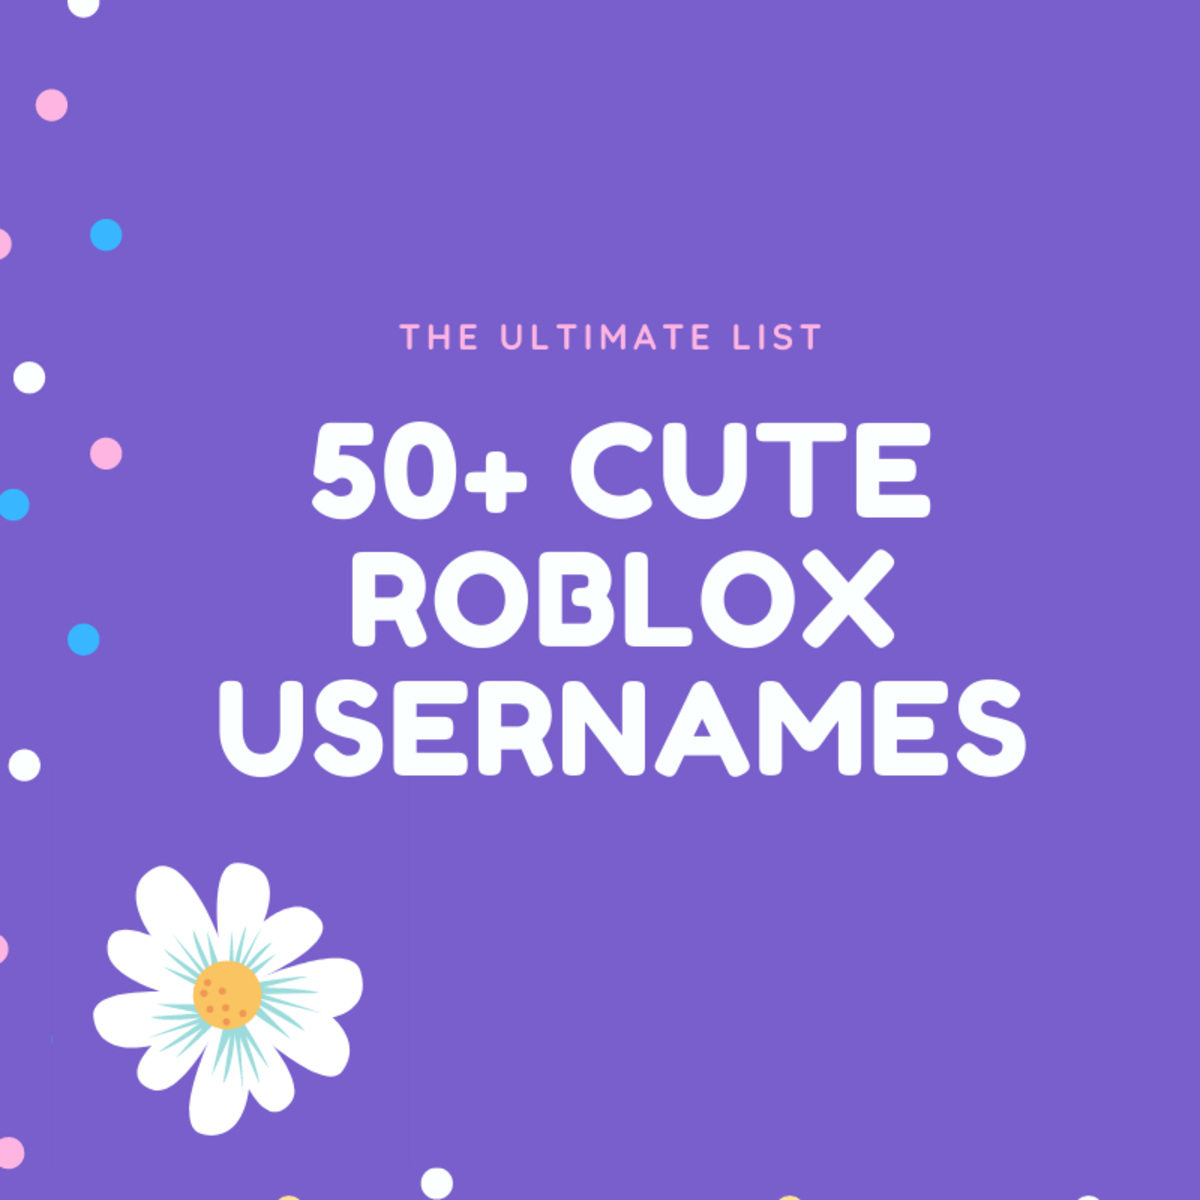 Discover lots of cute Roblox usernames and ideas in this ultimate list!